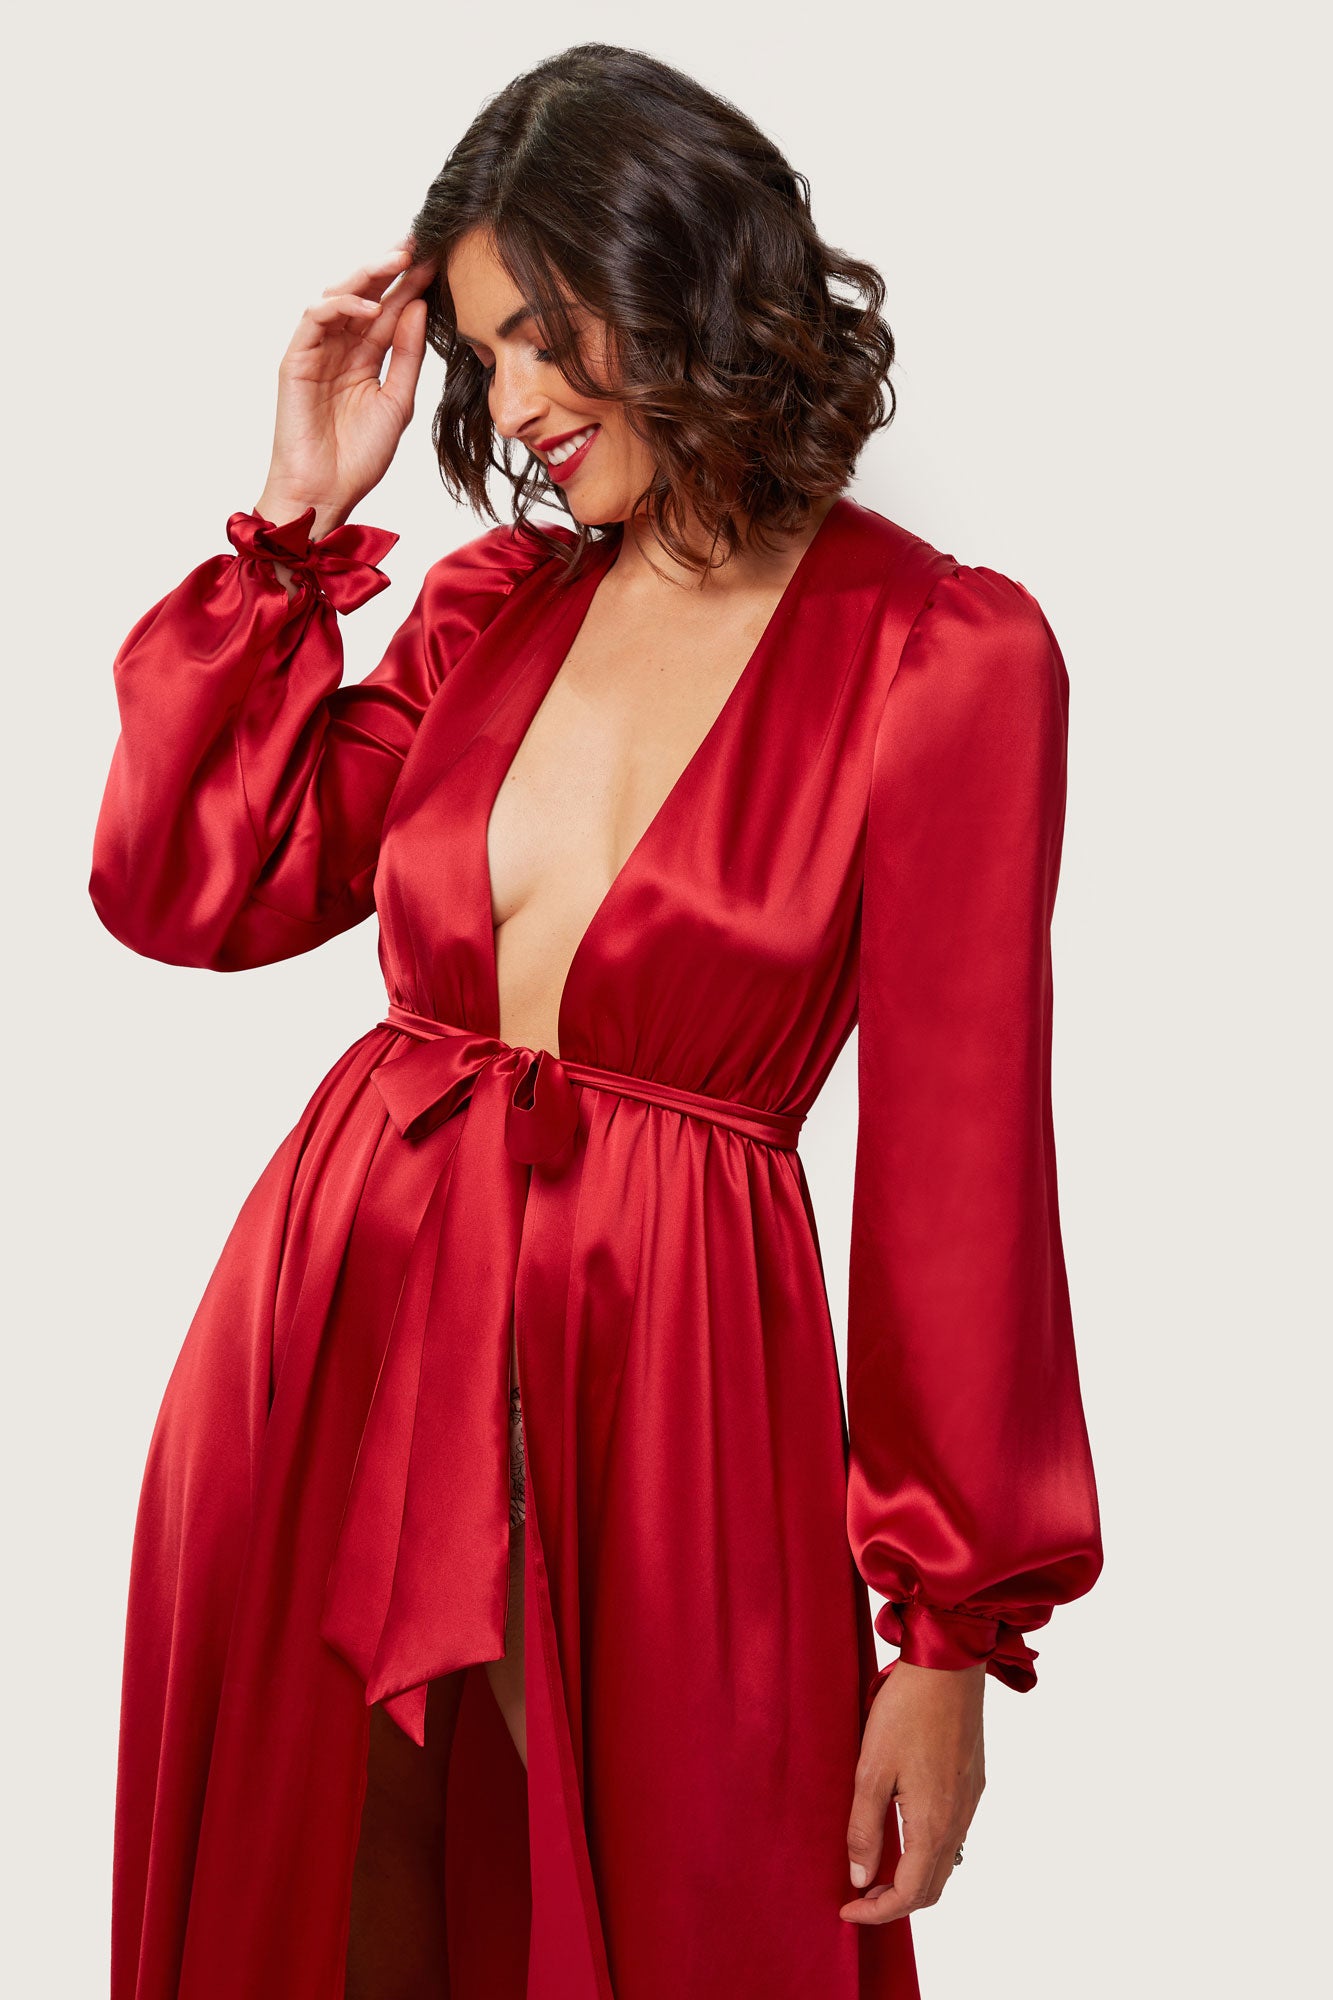 TikTok Loves This Glam Feather Robe from Amazon